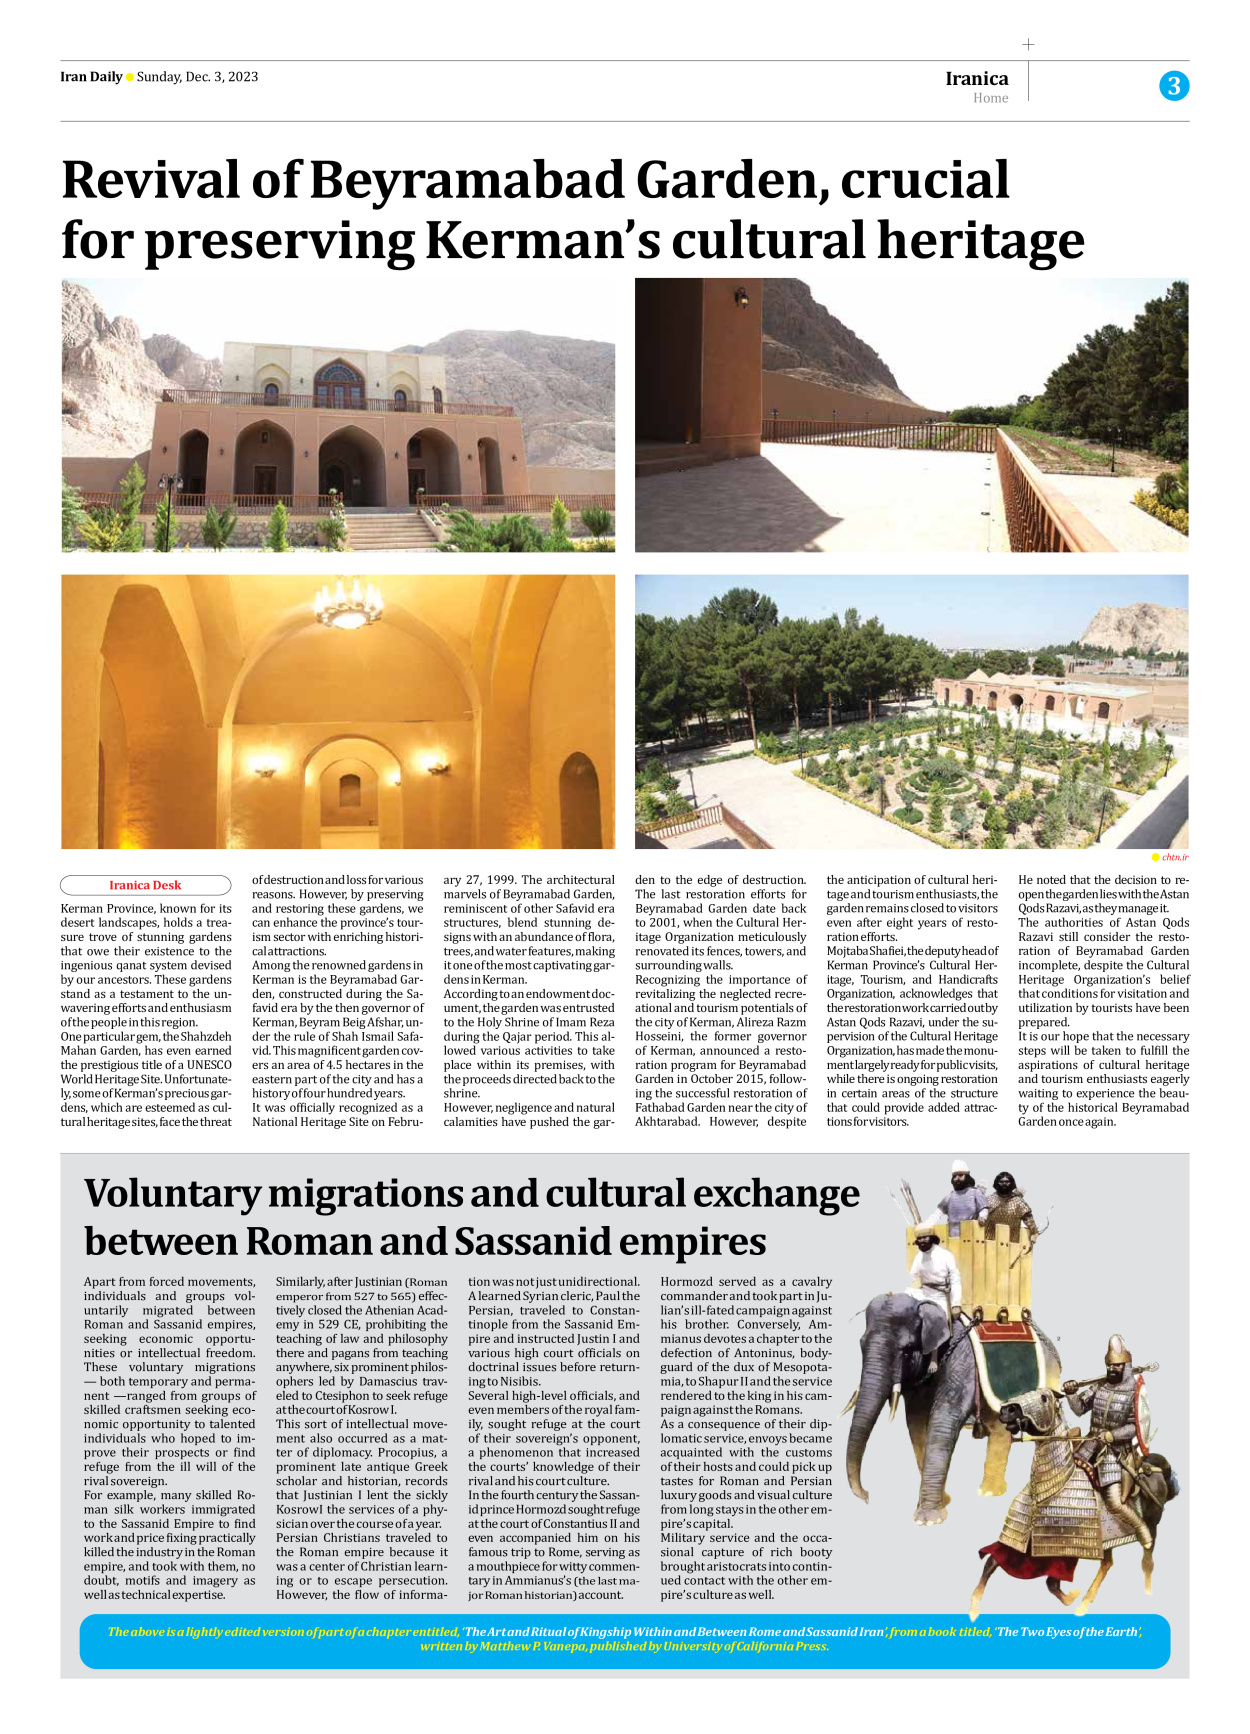 Iran Daily - Number Seven Thousand Four Hundred and Fifty - 03 December 2023 - Page 3